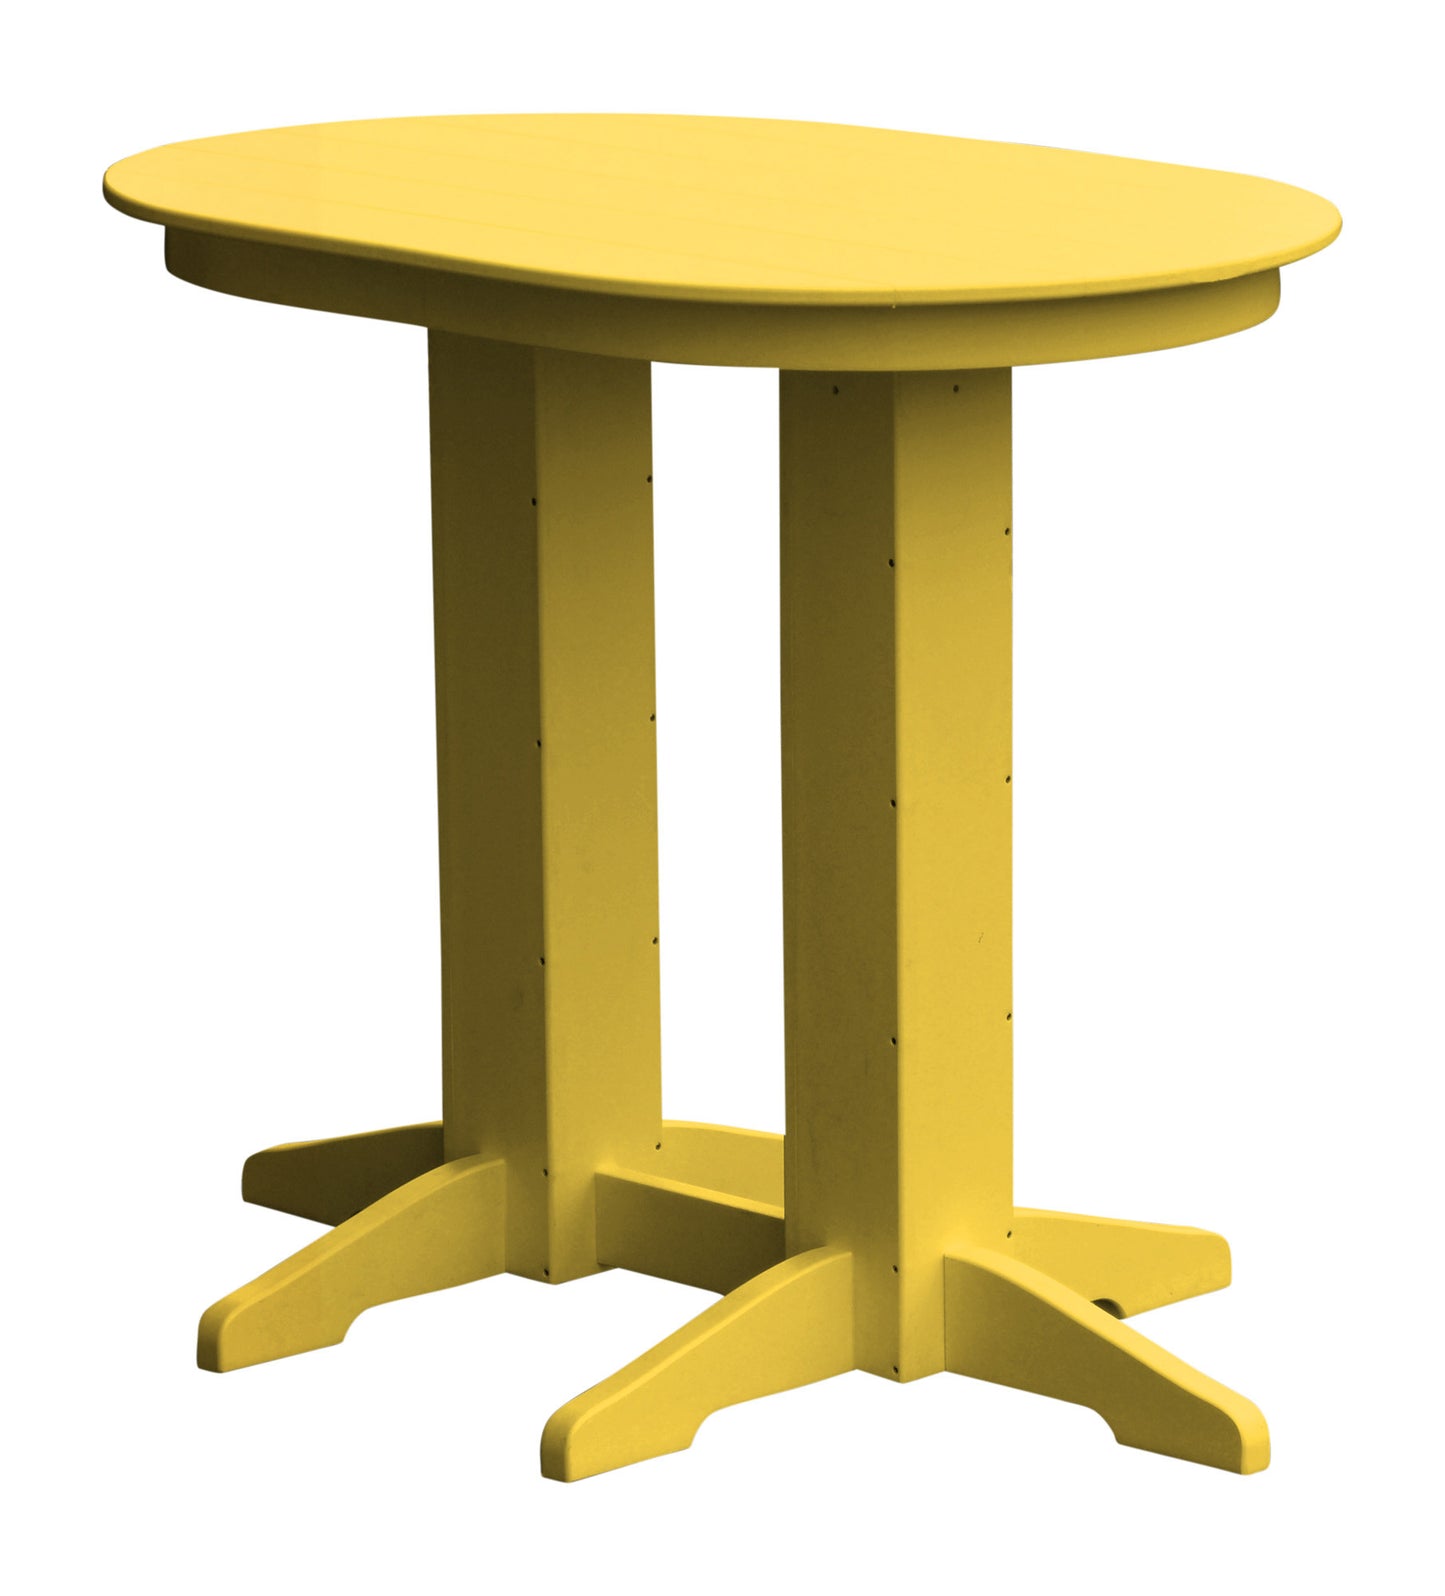 A&L Furniture Recycled Plastic 4' Oval Bar Table - Lemon Yellow